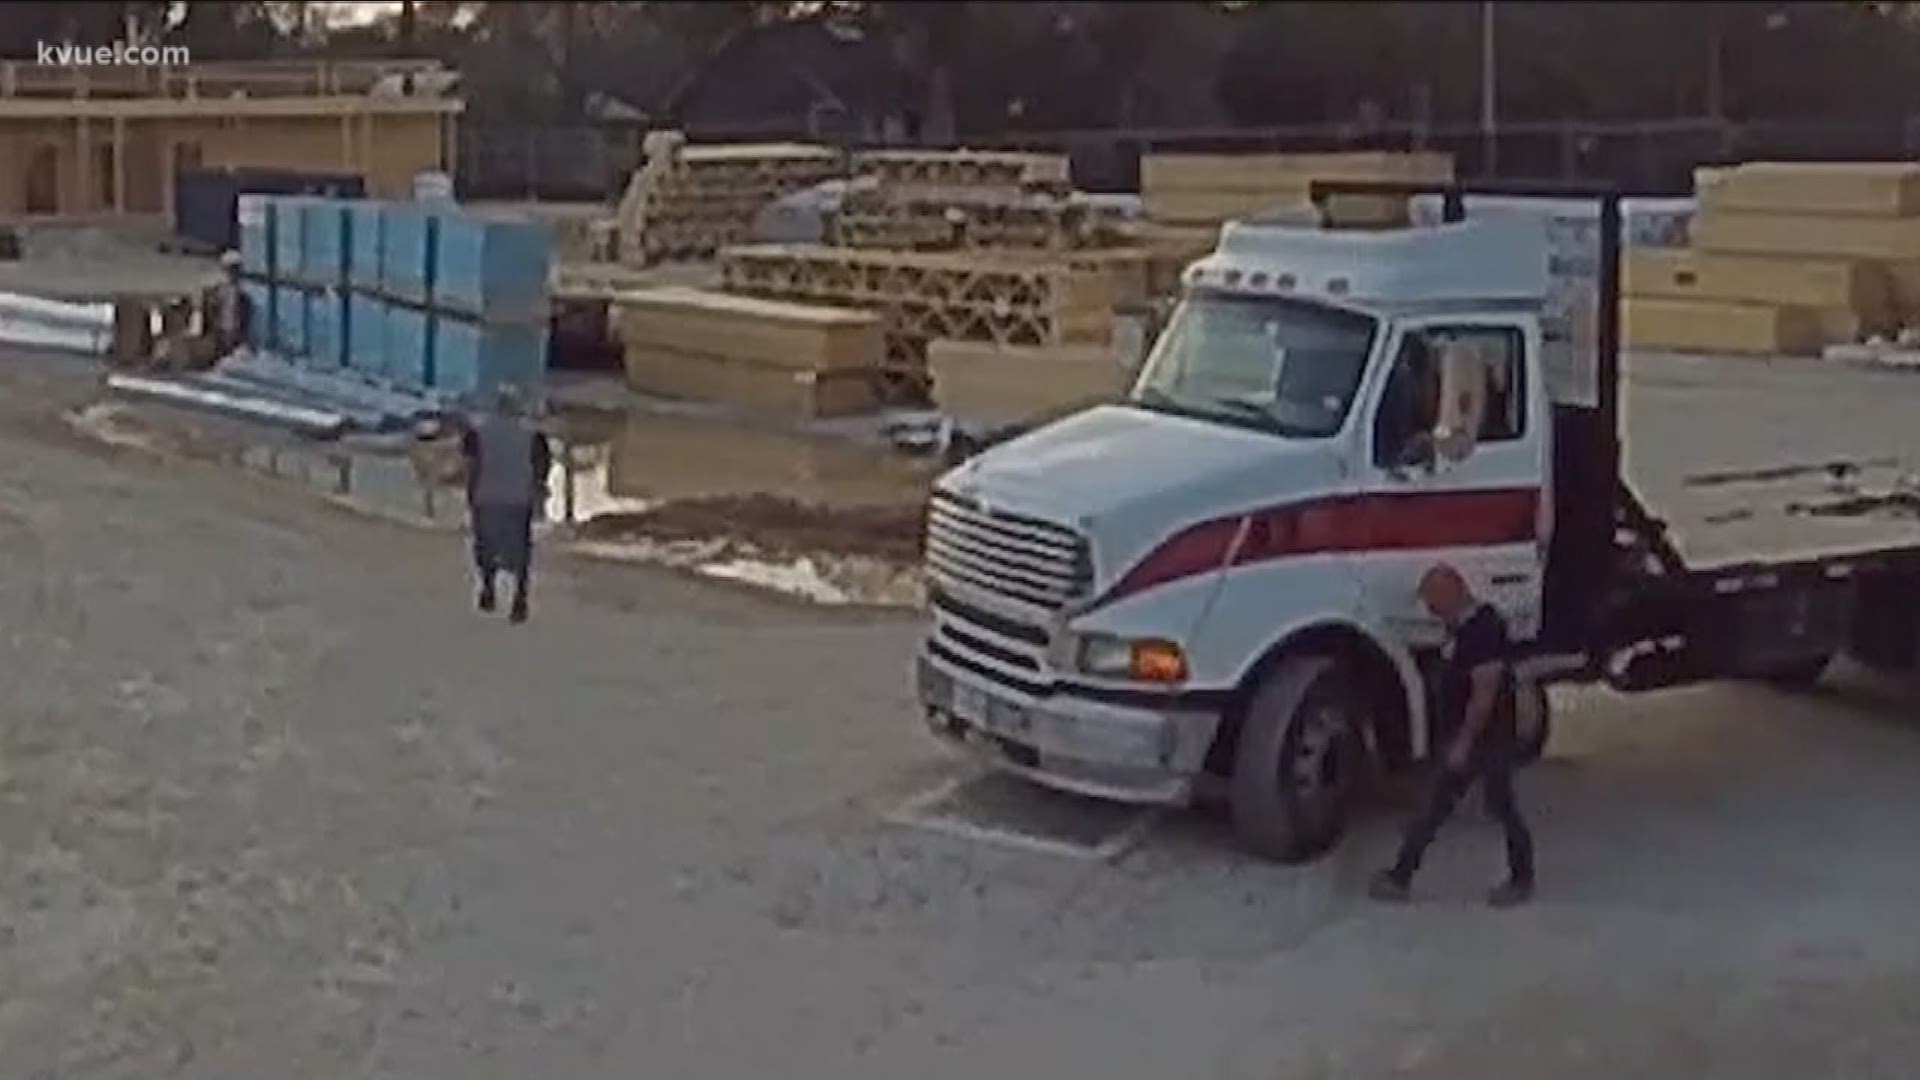 Video shows a $10,000 heist pulled off over the weekend at a South Austin construction site.